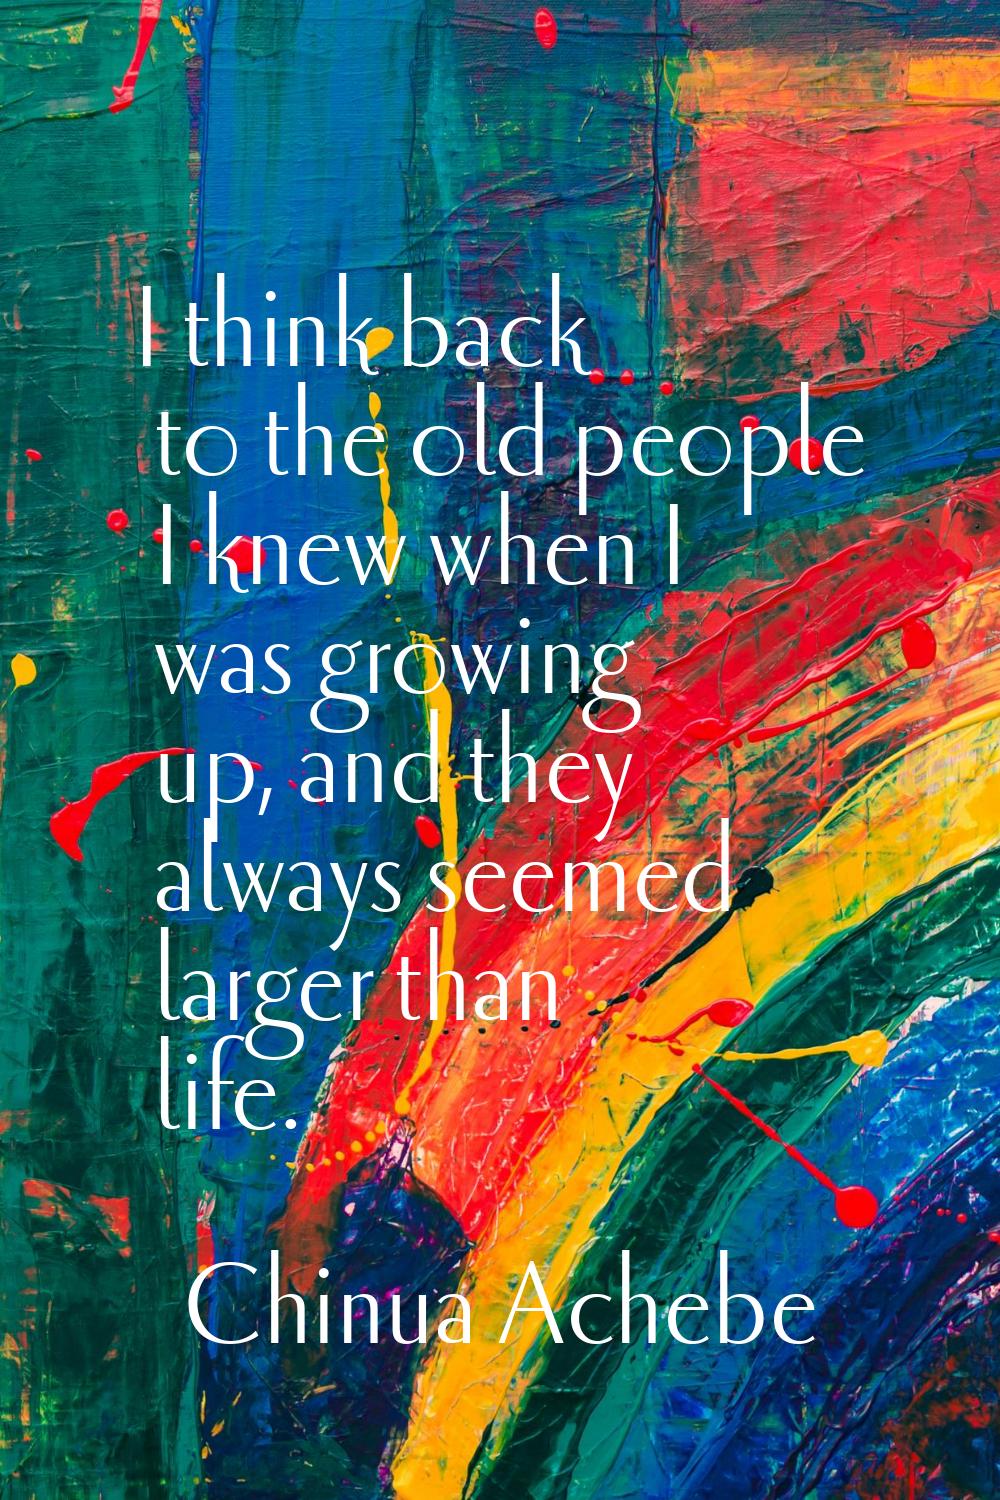 I think back to the old people I knew when I was growing up, and they always seemed larger than lif